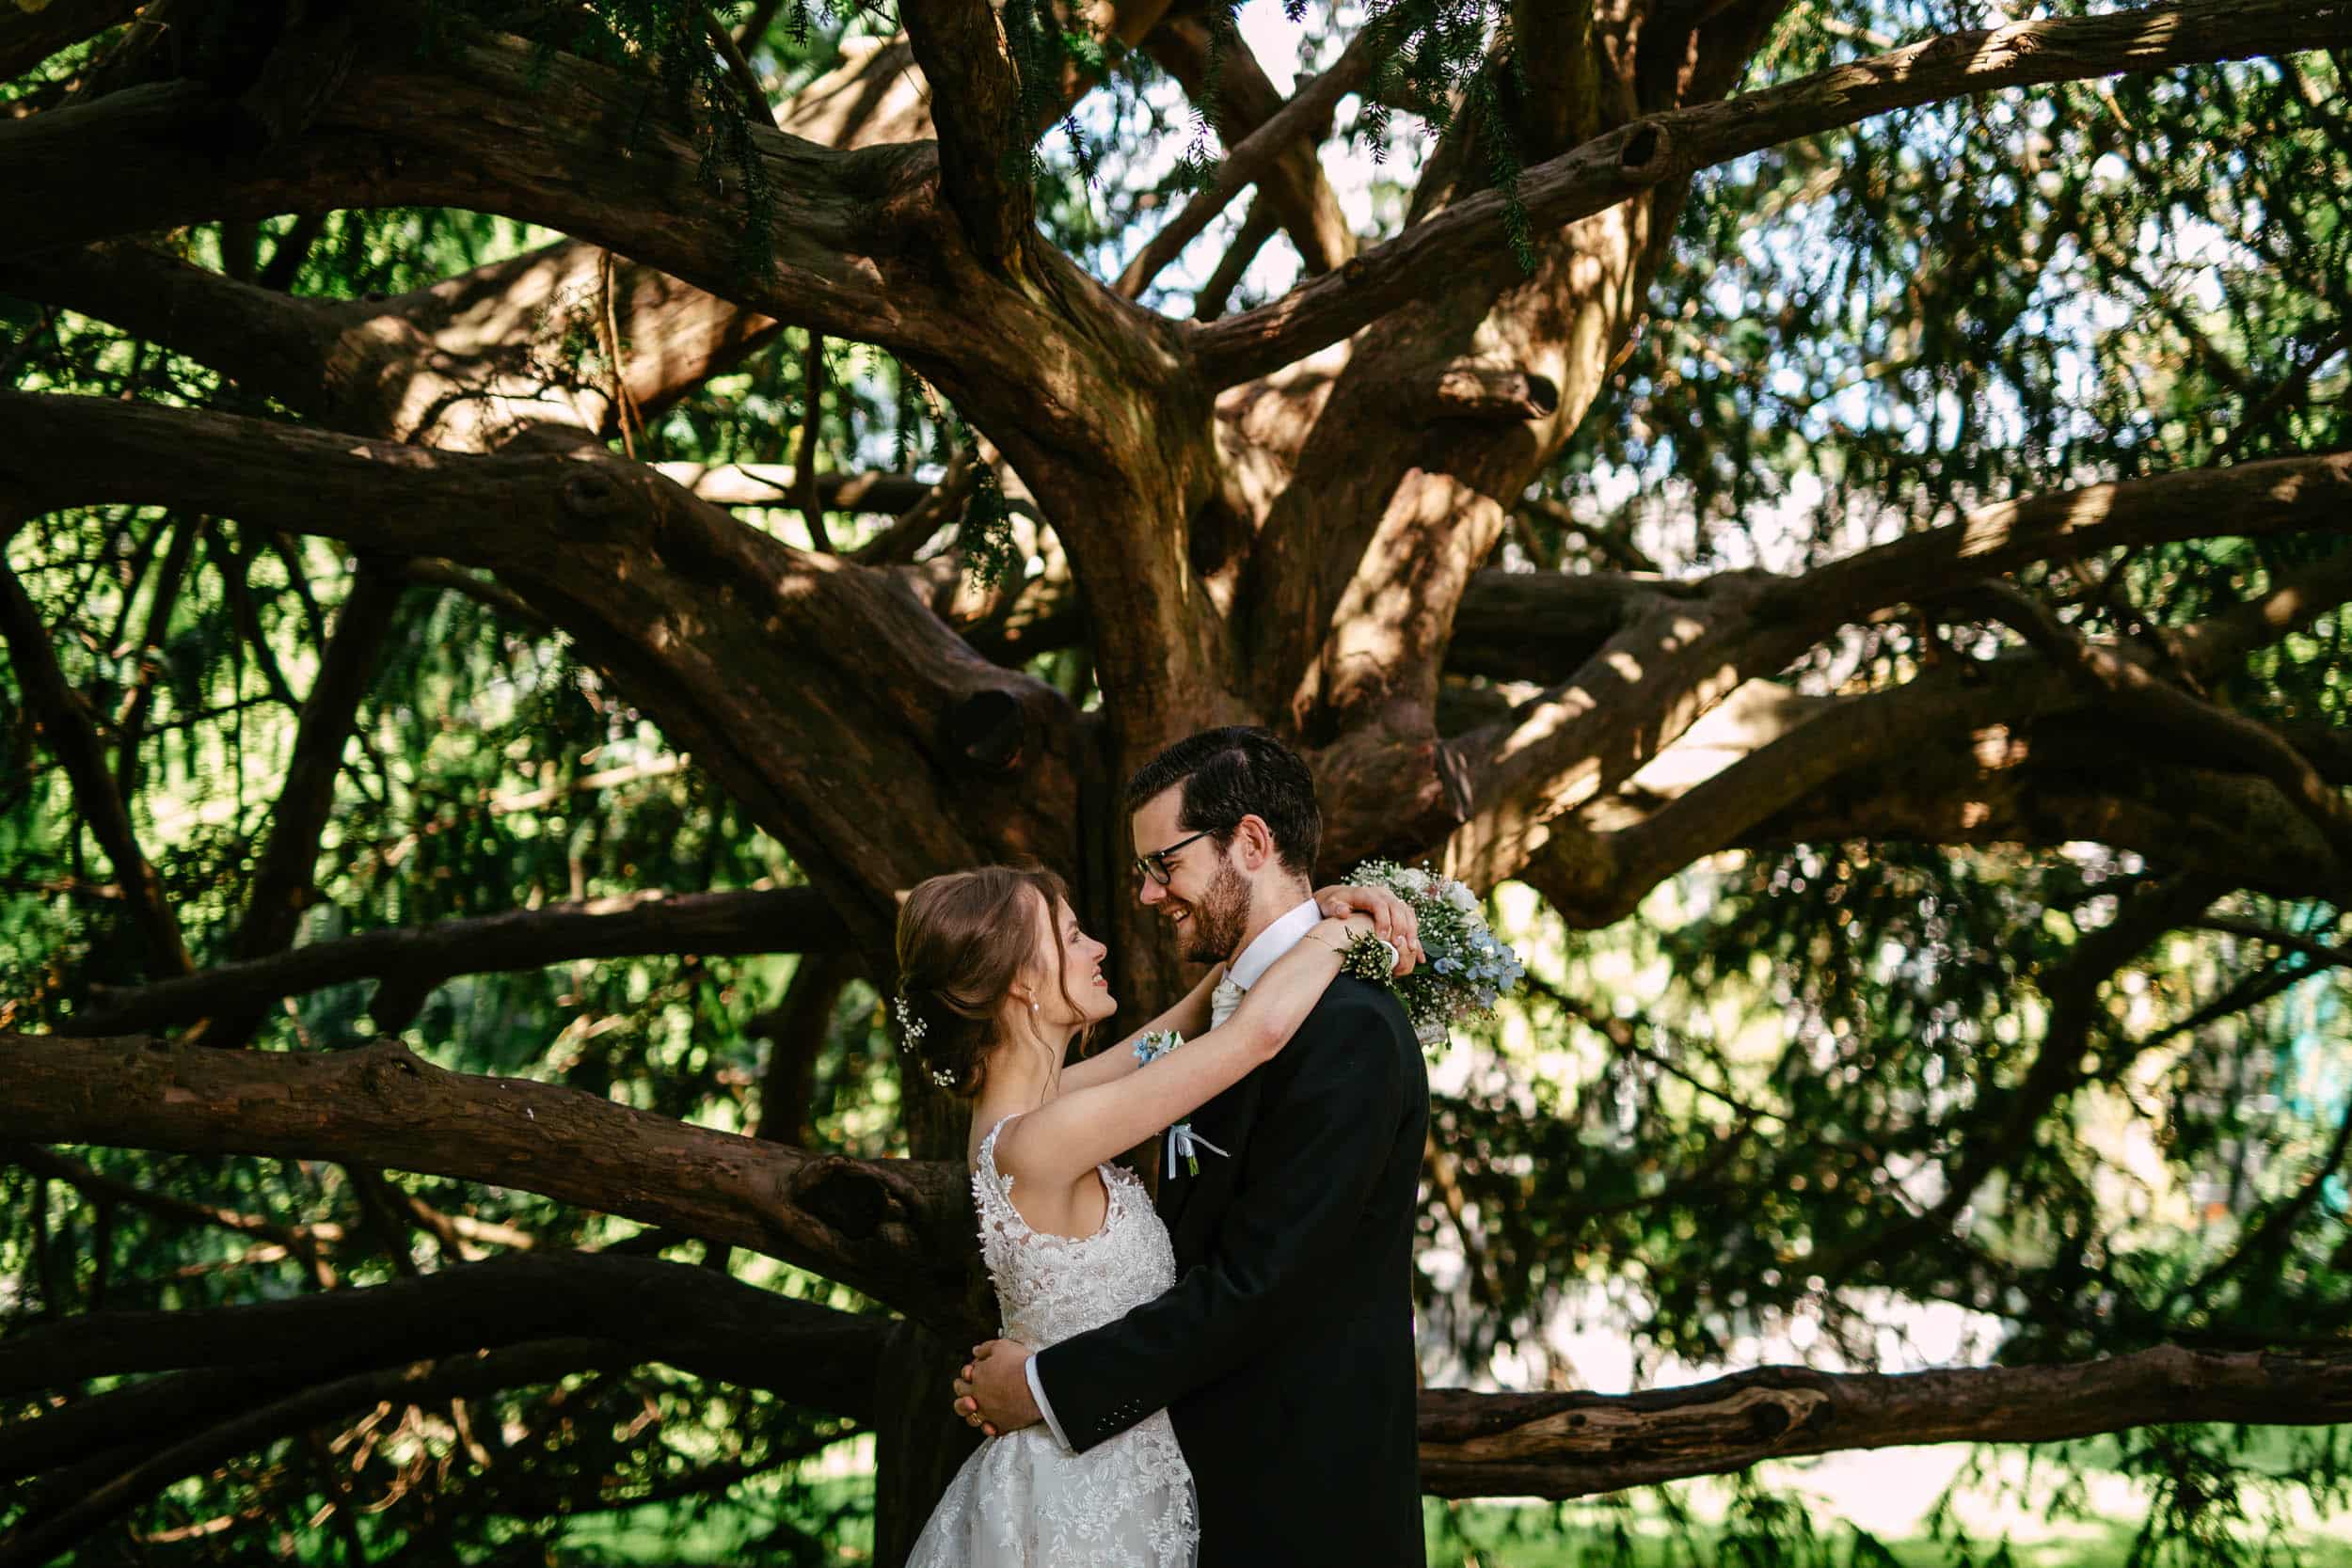 A couple embrace each other under a big tree at their Wedding in the botanical garden delft.